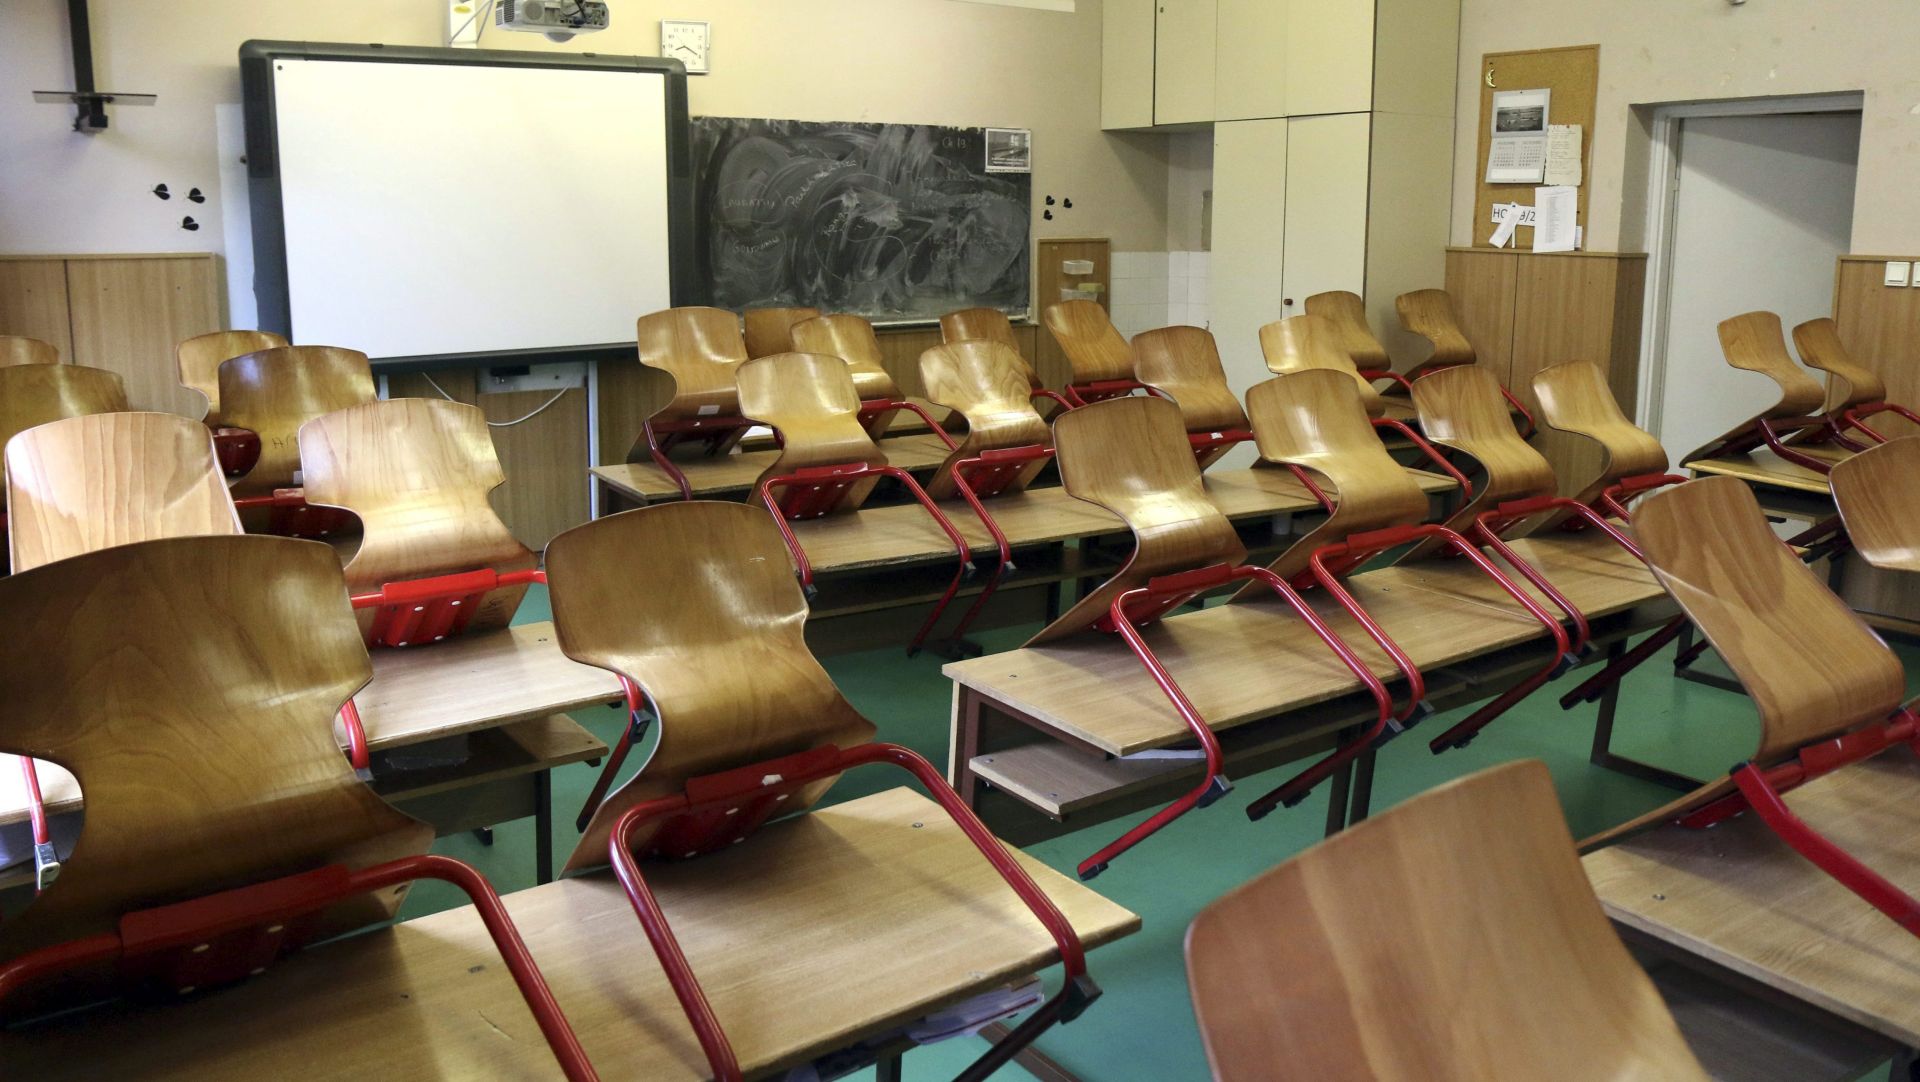 epa05268094 An empty classroom in Herman Otto Secondary School during a nationwide strike of Hungarian teachers in Miskolc, 174 kms northeast of Budapest, 20 April 2016. Trade unions of teachers called upon the one-day strike among others to force the government to restructure the education system and to reduce the teachers' compulsory classroom hours.  EPA/JANOS VAJDA HUNGARY OUT